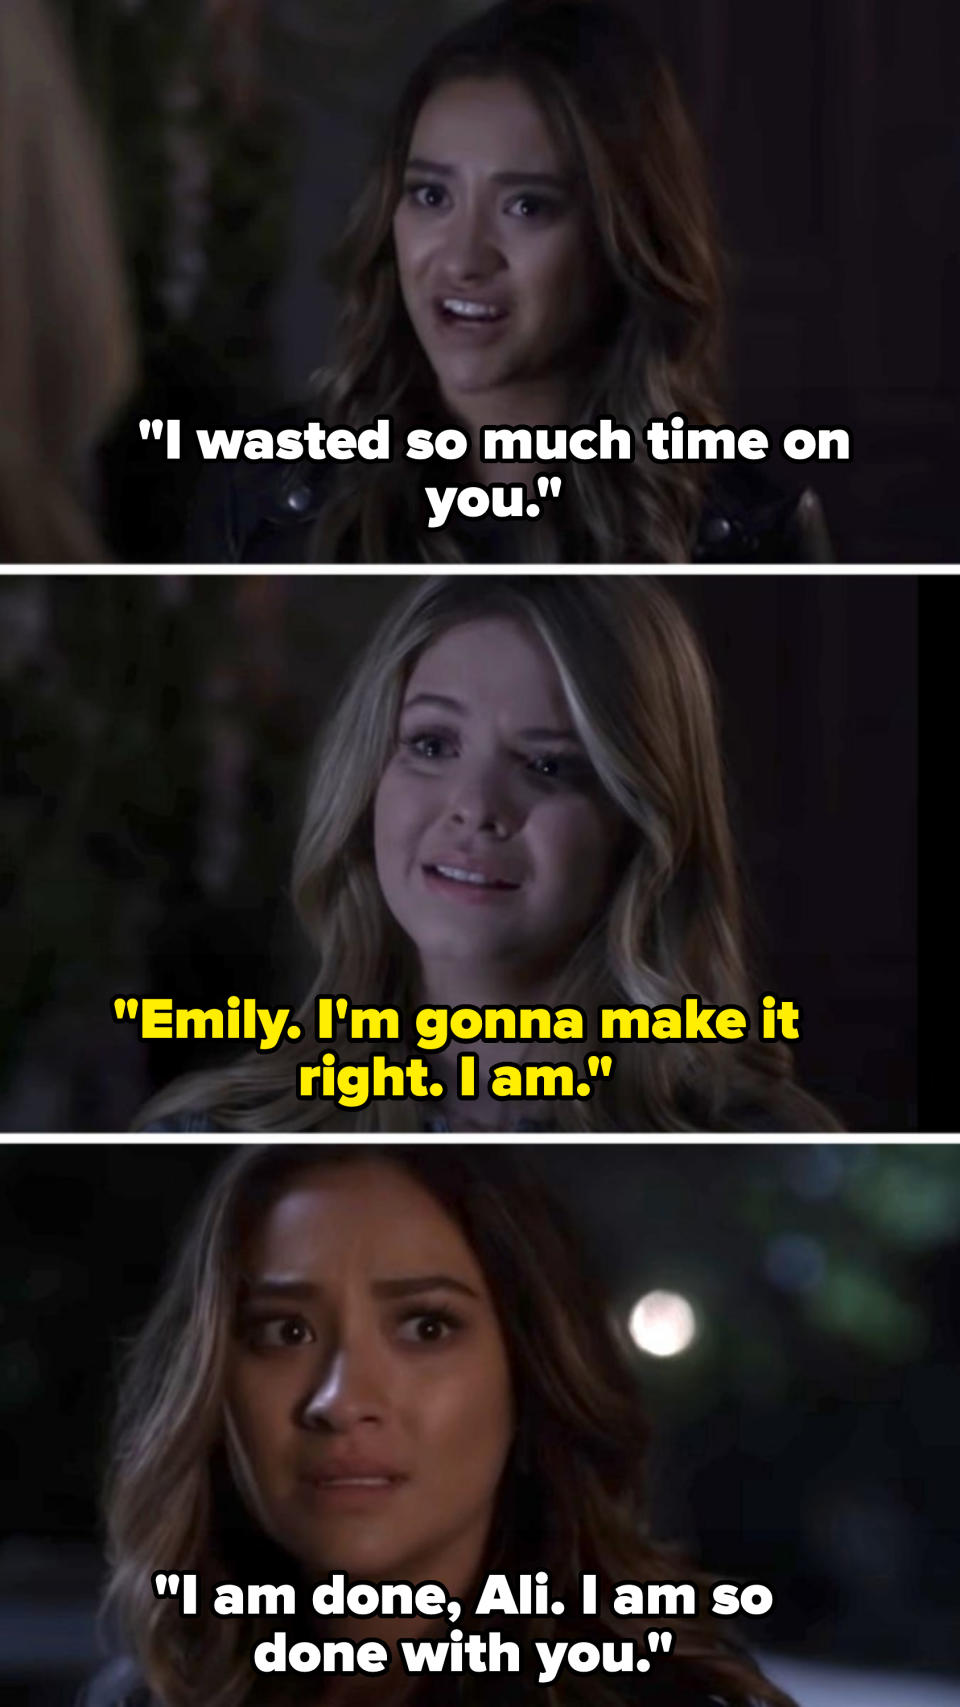 Shay Mitchell and Sasha Pieterse, from the show Pretty Little Liars, appear in a serious and emotional conversation in three different scenes